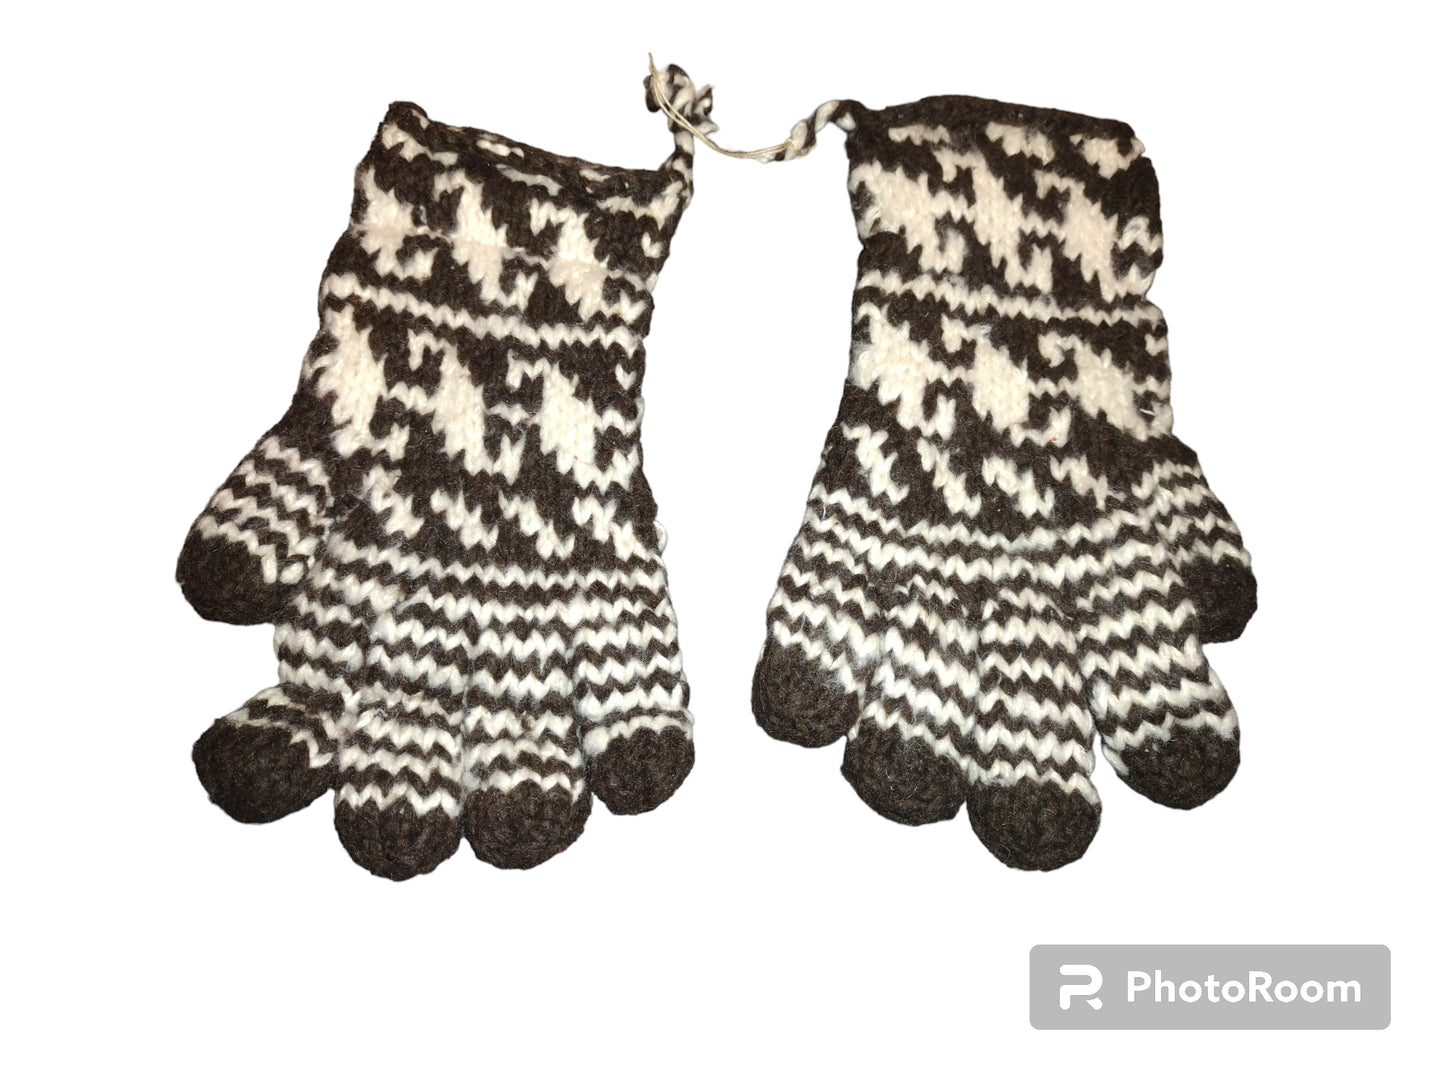 Wool Gloves (Adult Size)